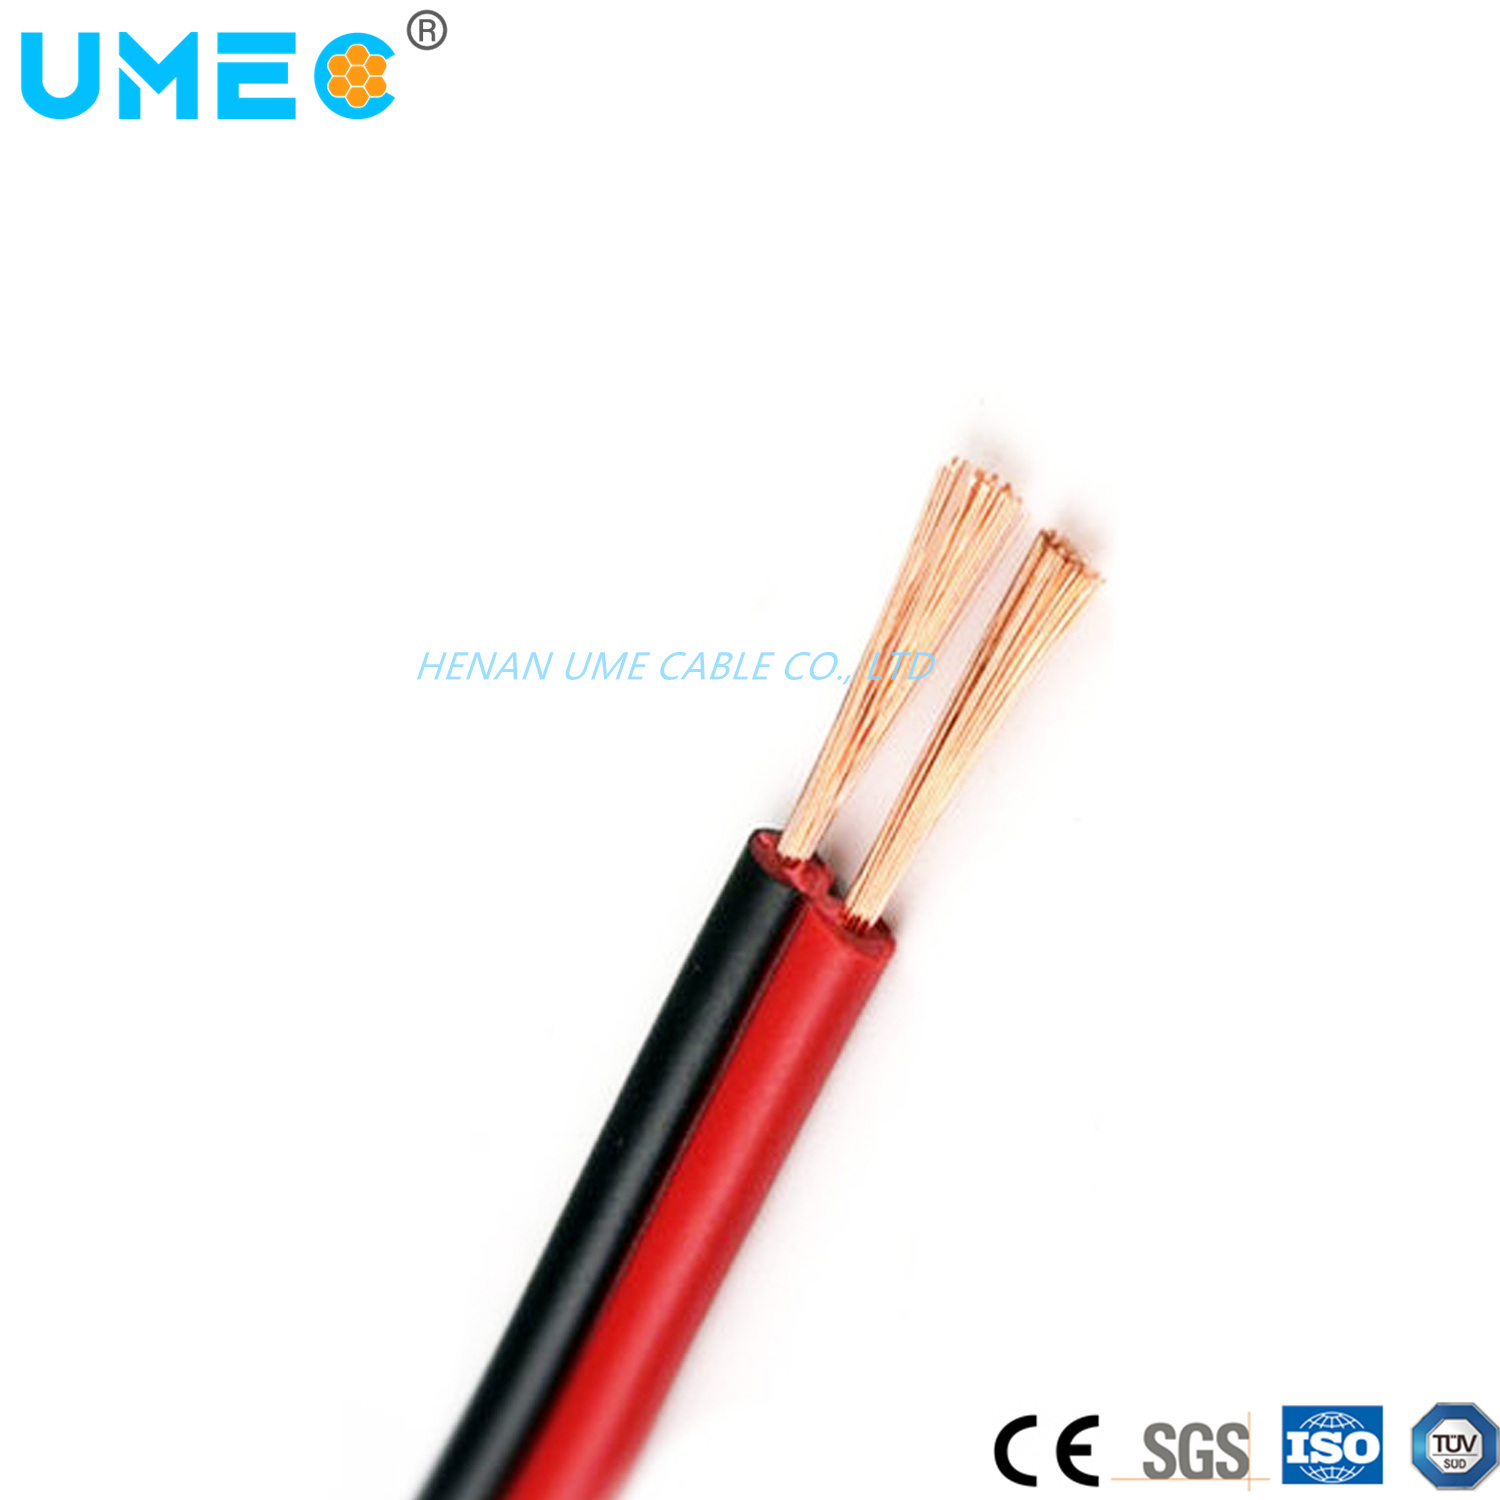 DC Building Cord Spt-1 Double Parallel Cables 2X20AWG 18AWG 16AWG 14AWG Red and Black Color Price